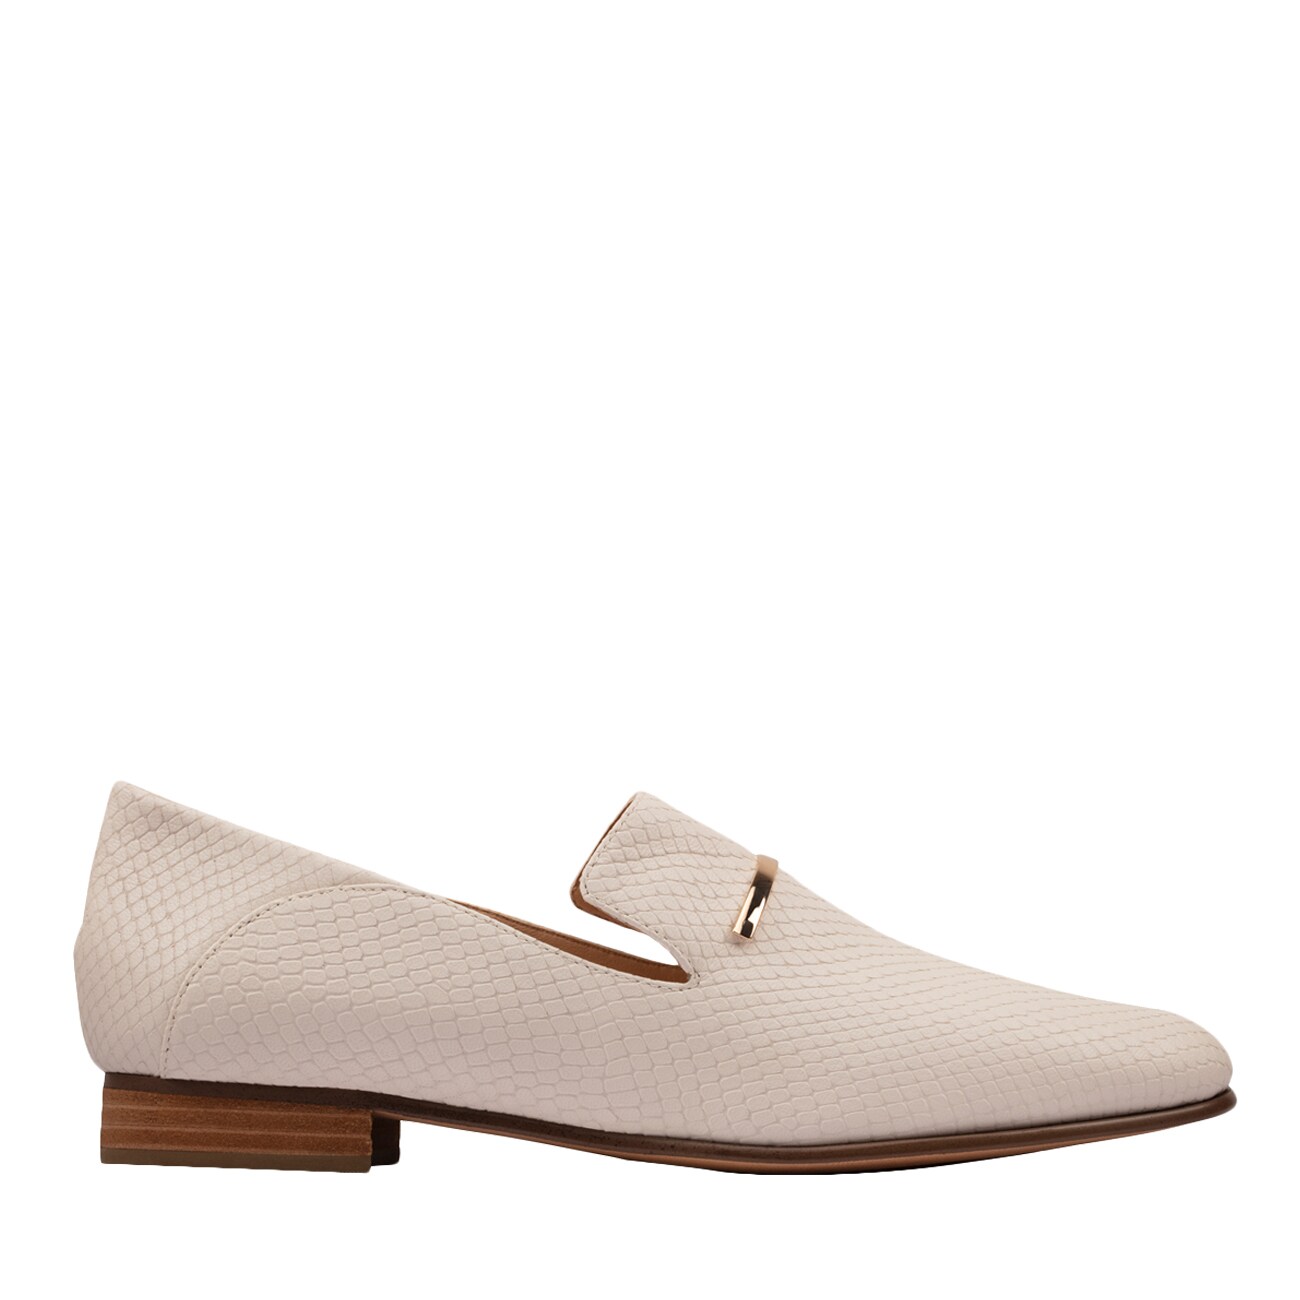 clarks canada shoes online